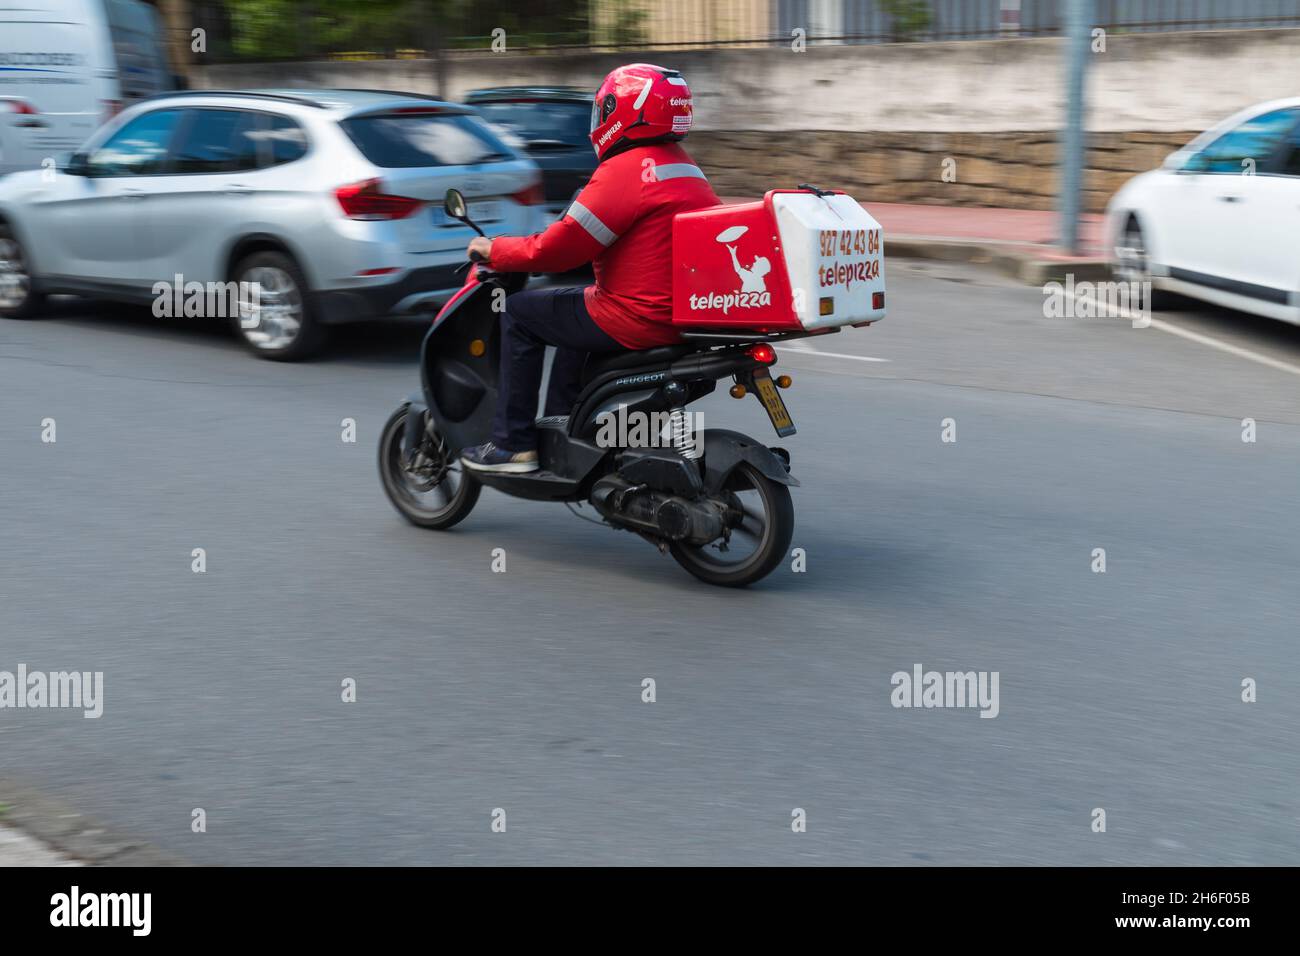 PLASENCIA, SPAIN - May 11, 2021: A pizza delivery man driving a Scooter-type motorcycle from the Telepizza chain delivers pizzas at home Stock Photo